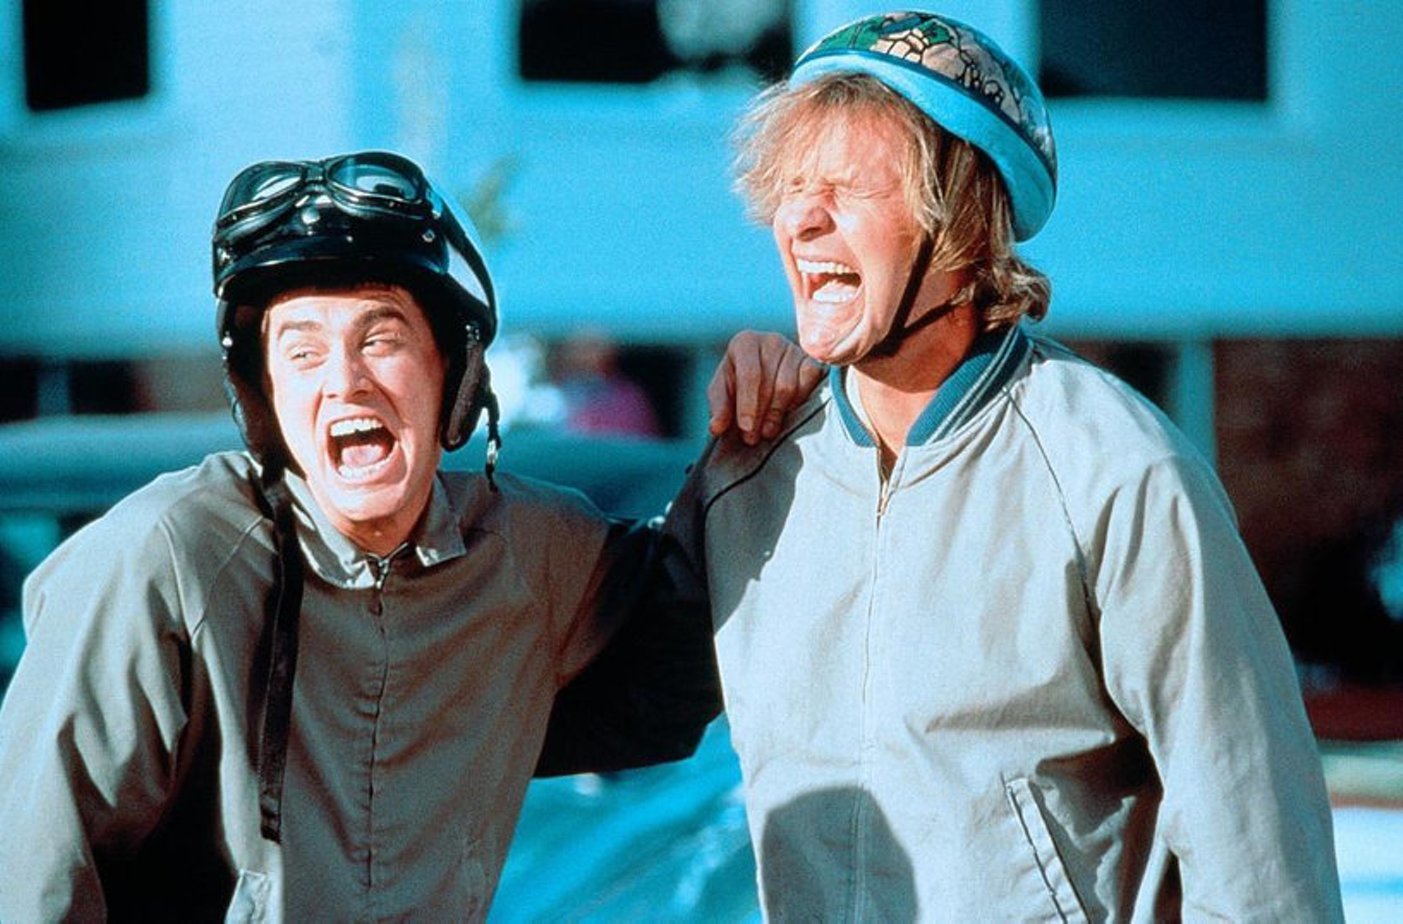 Jim Carrey Dumb and Dumber film about us - Longpost, Video, Dumb and Dumber (film), Comedy, Hollywood, Movies, Jim carrey, My